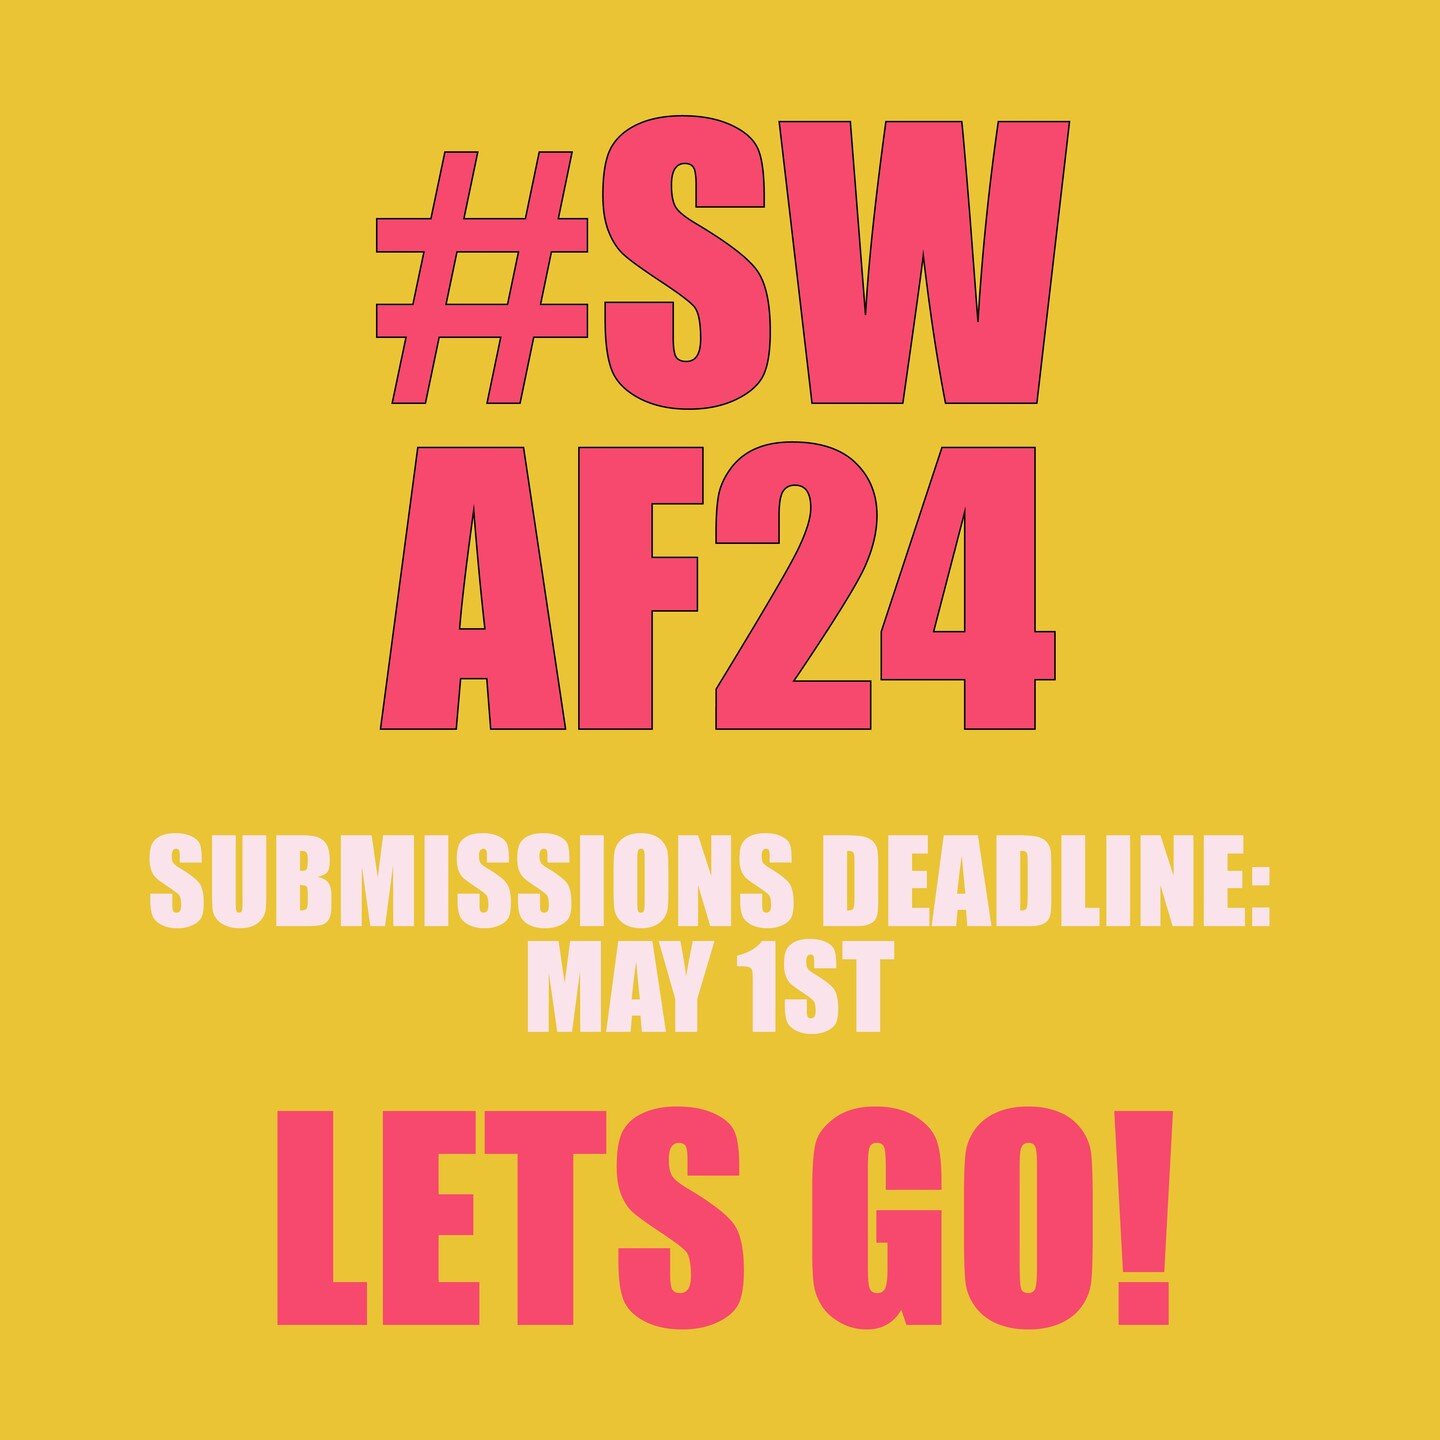 Artsite is excited to get the community together for #SWAF24 - The first official Swindon Arts Fringe! 

Please take a look at the exciting list of exhibitions we'll be running here on our official website: 

https://www.swindonartsfringe.net/

SWAF 